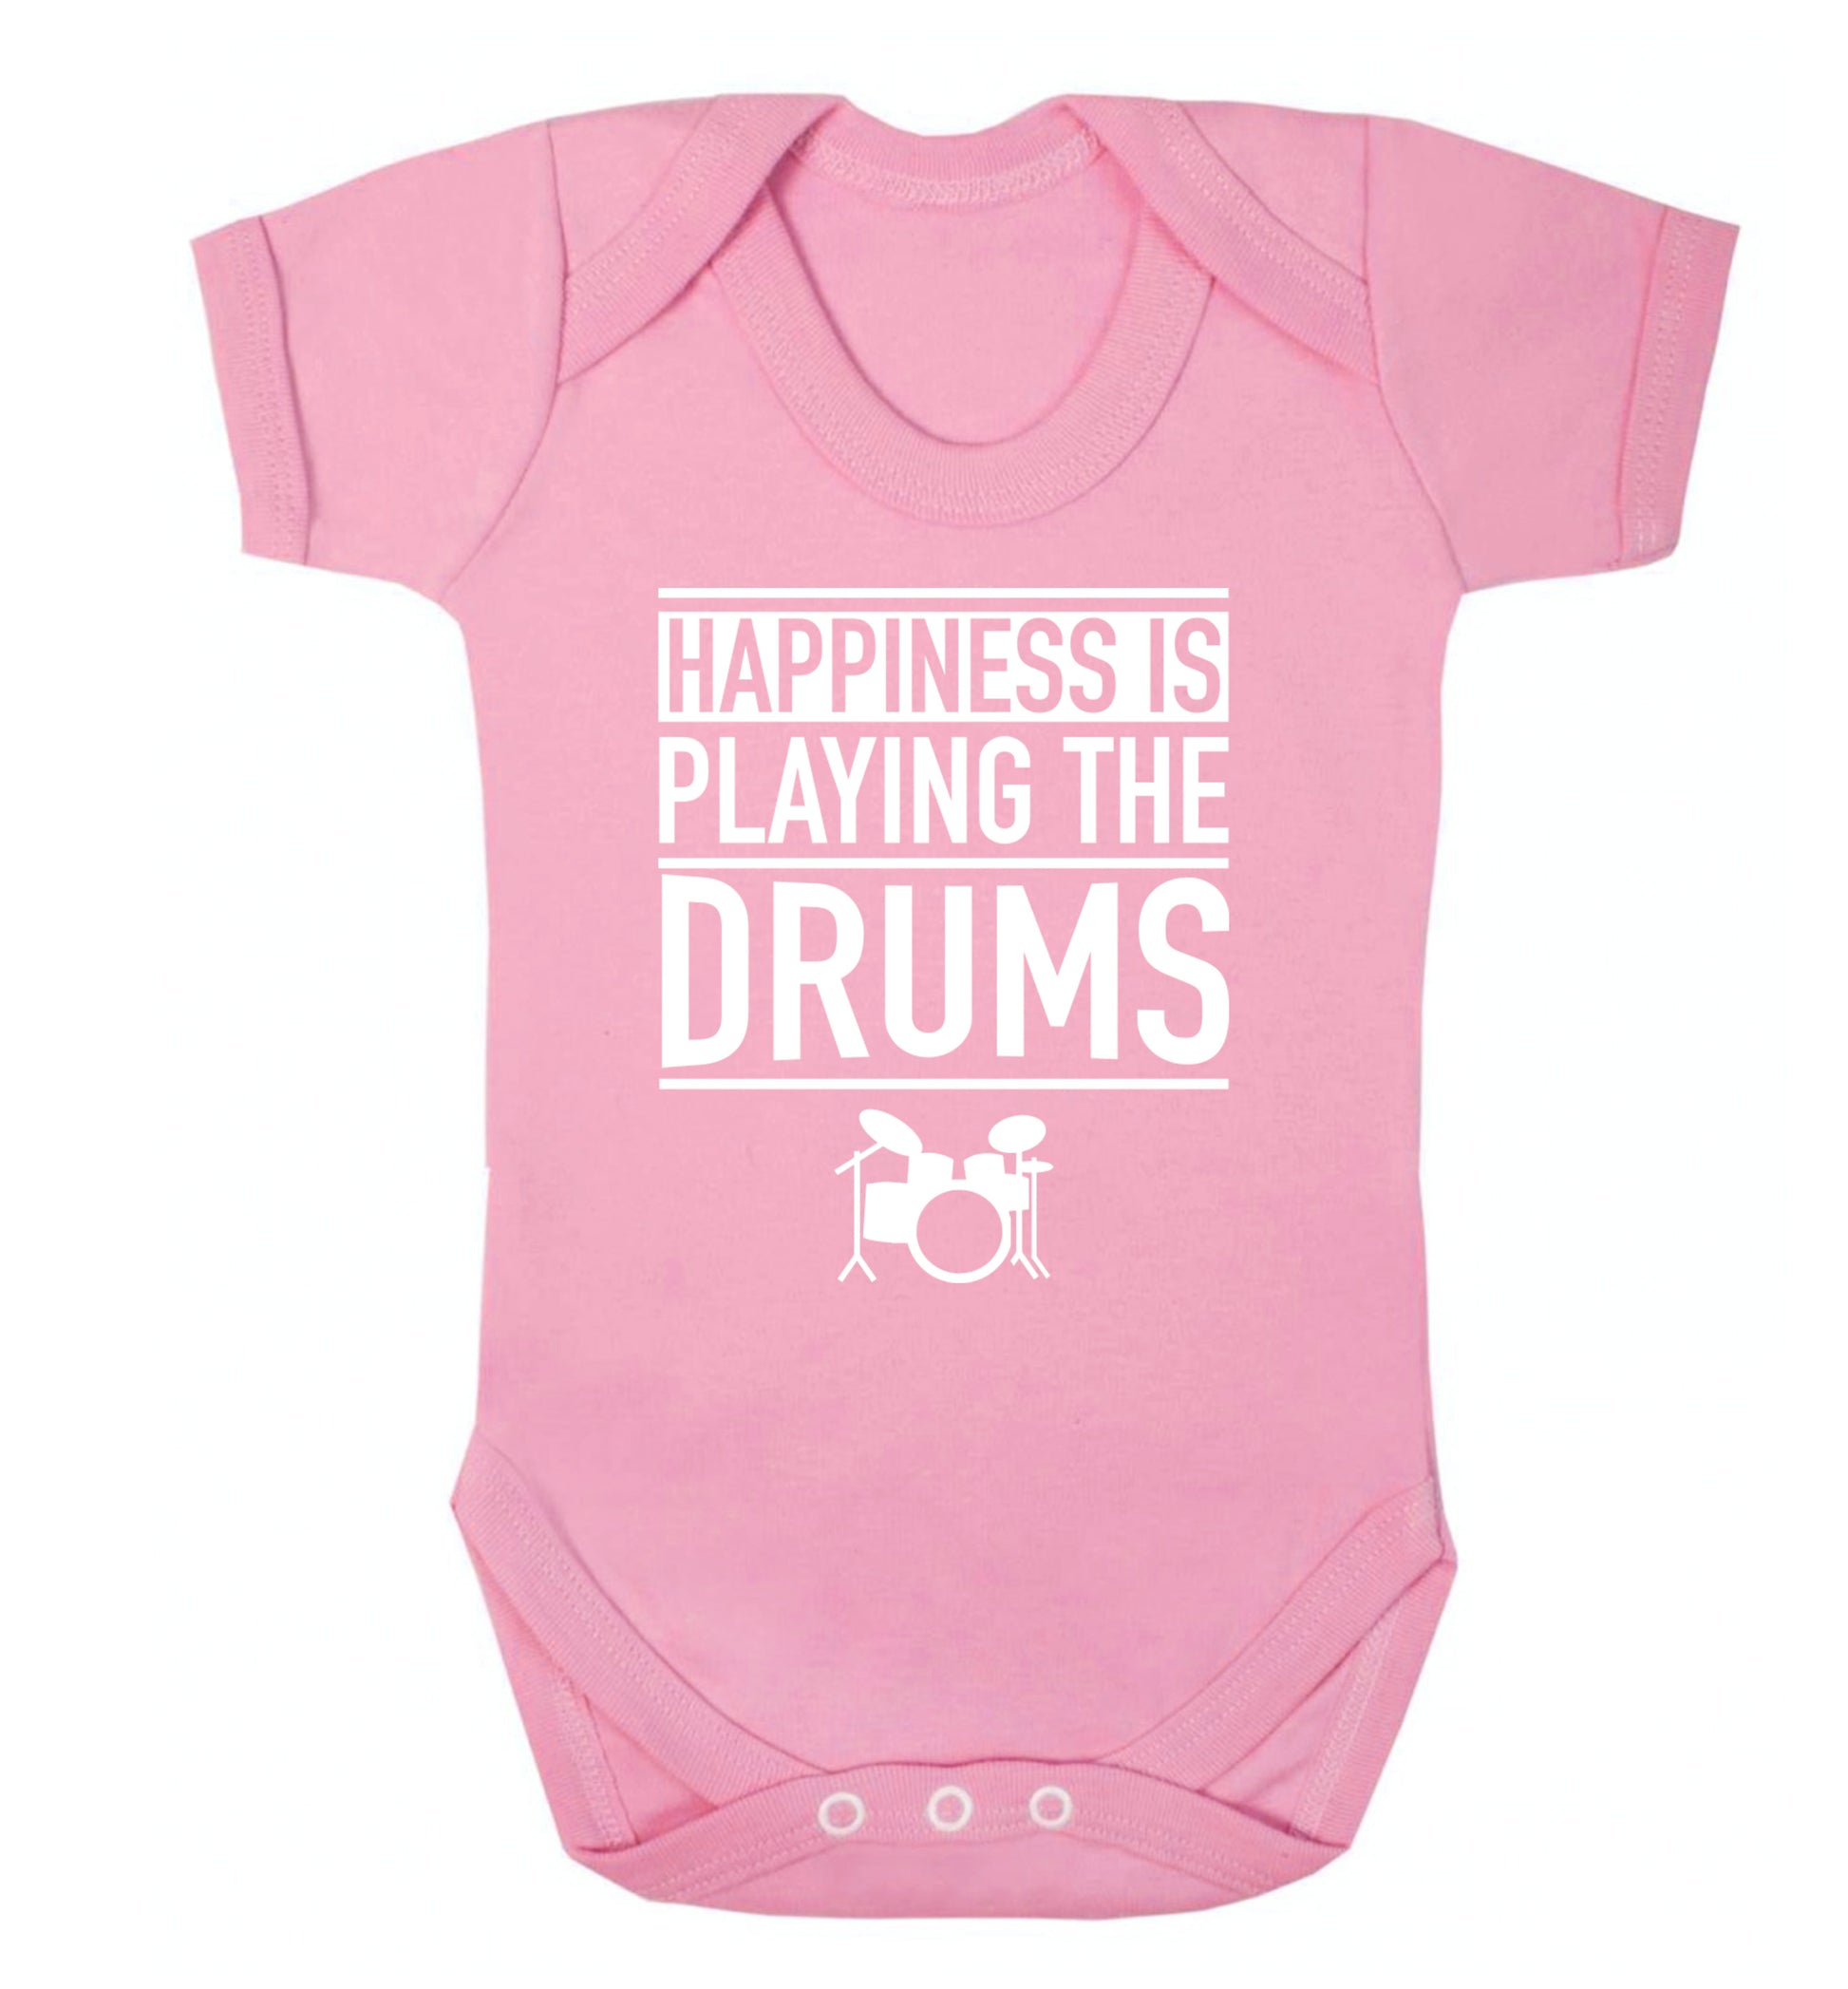 Happiness is playing the drums Baby Vest pale pink 18-24 months